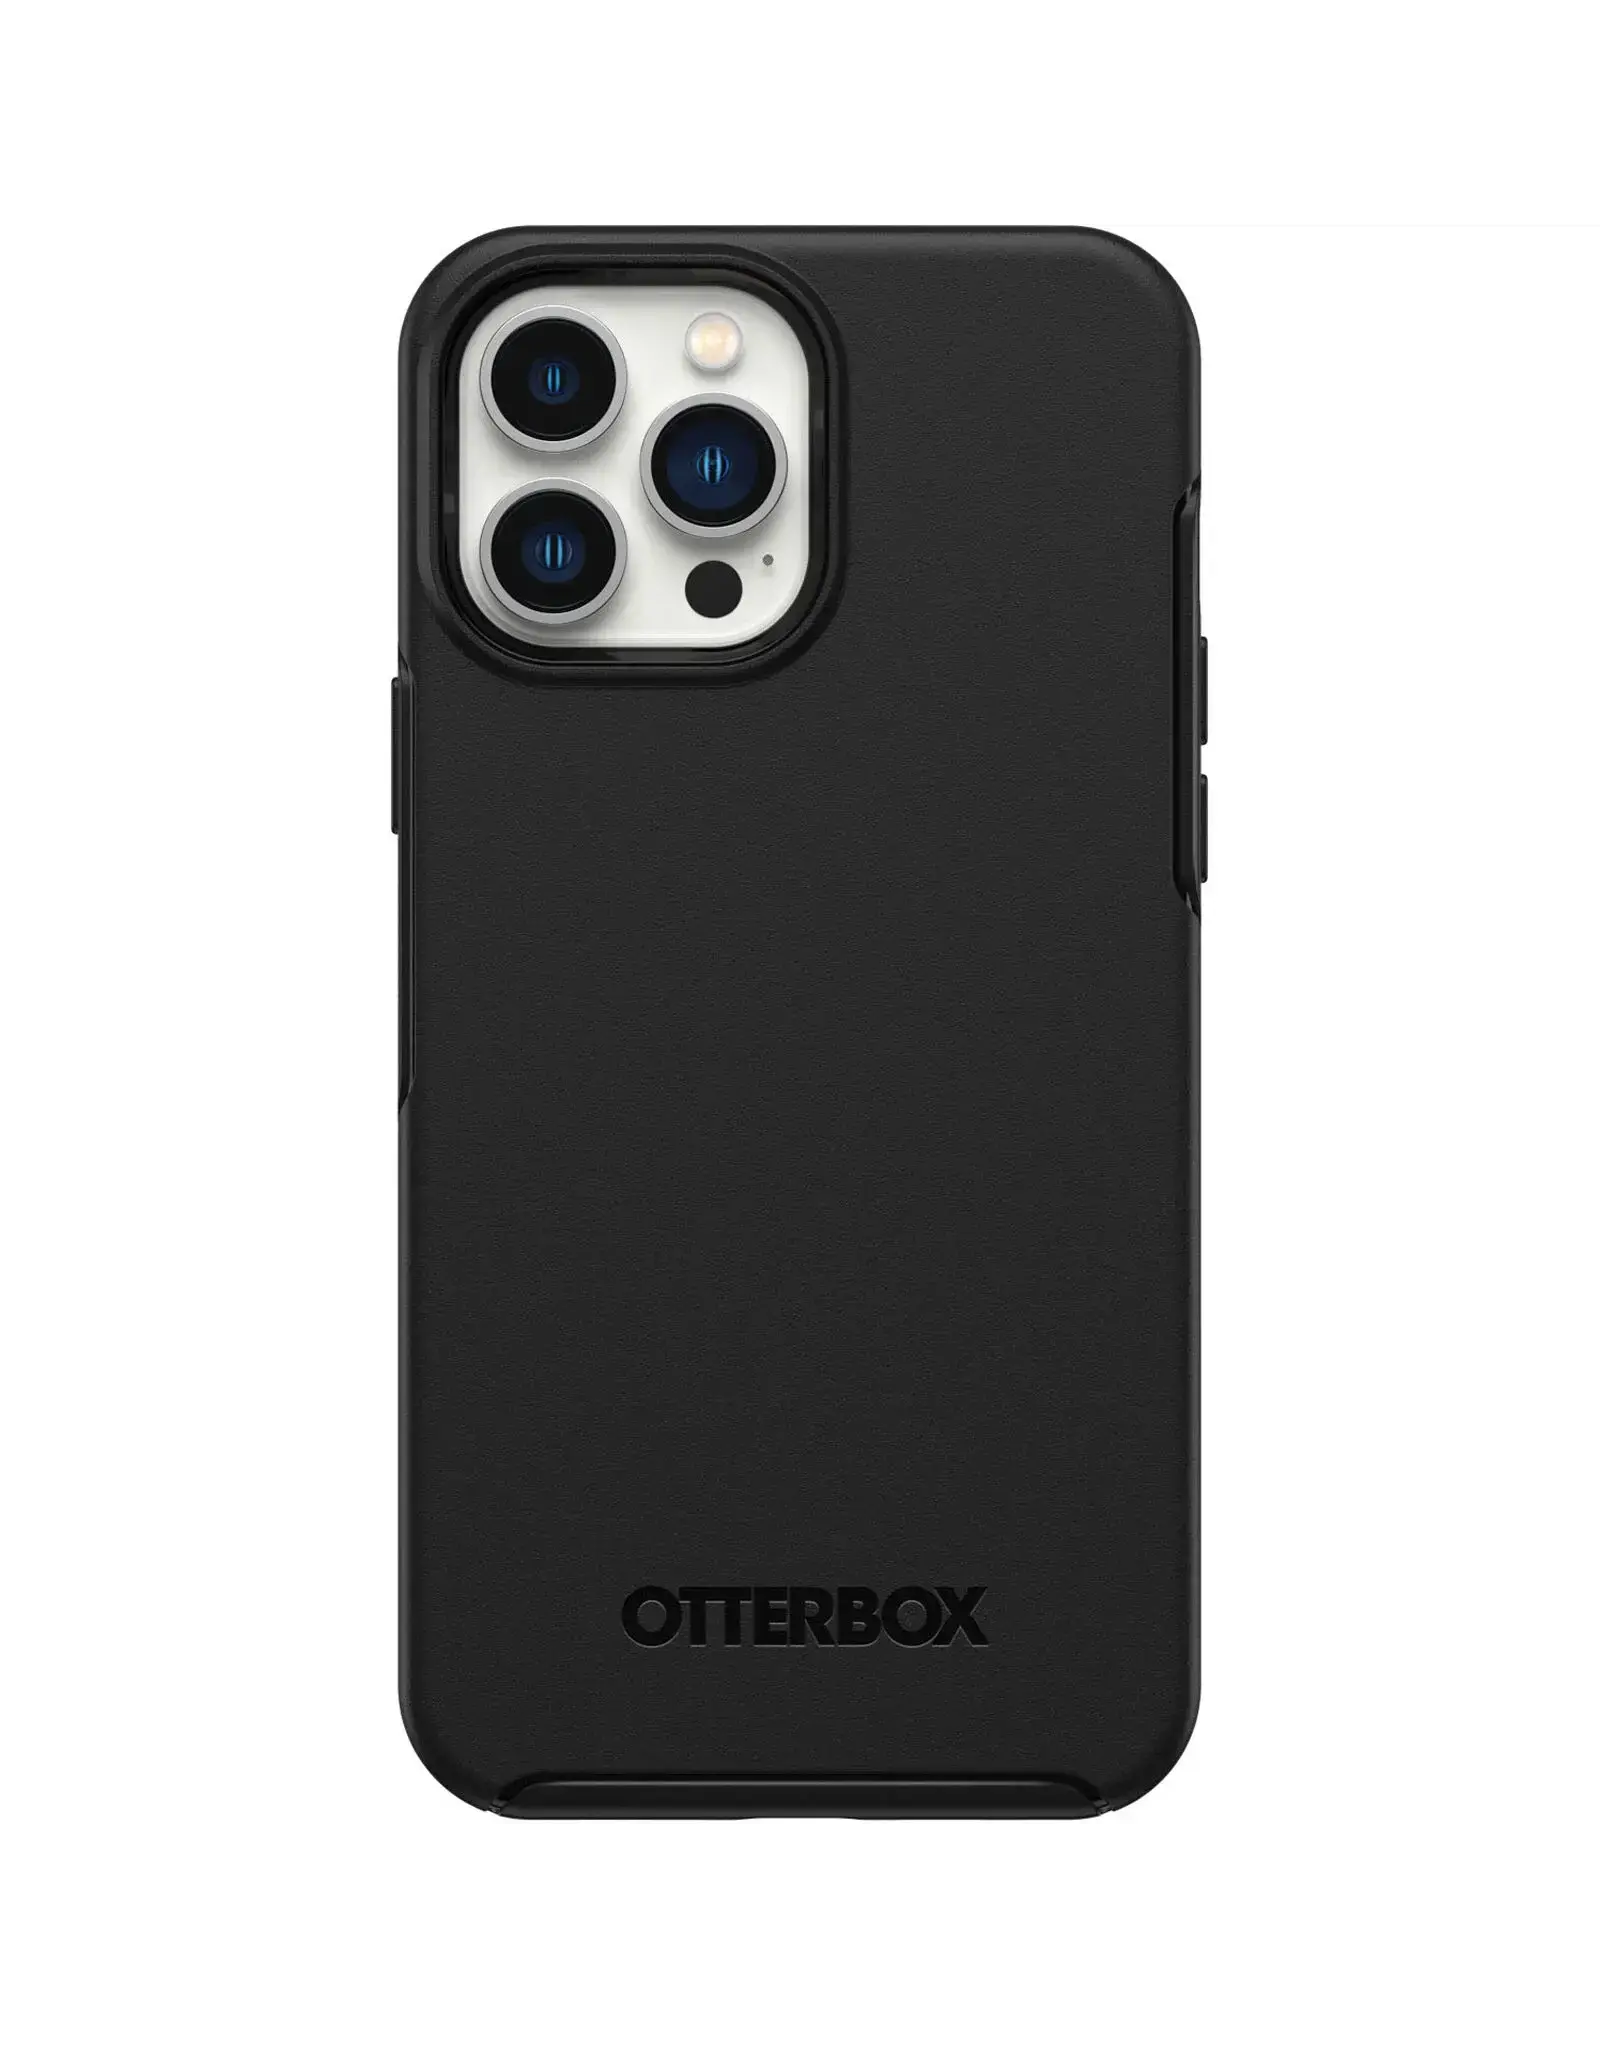 Otterbox OtterBox Symmetry Case for iPhone 13 Pro Max - Black